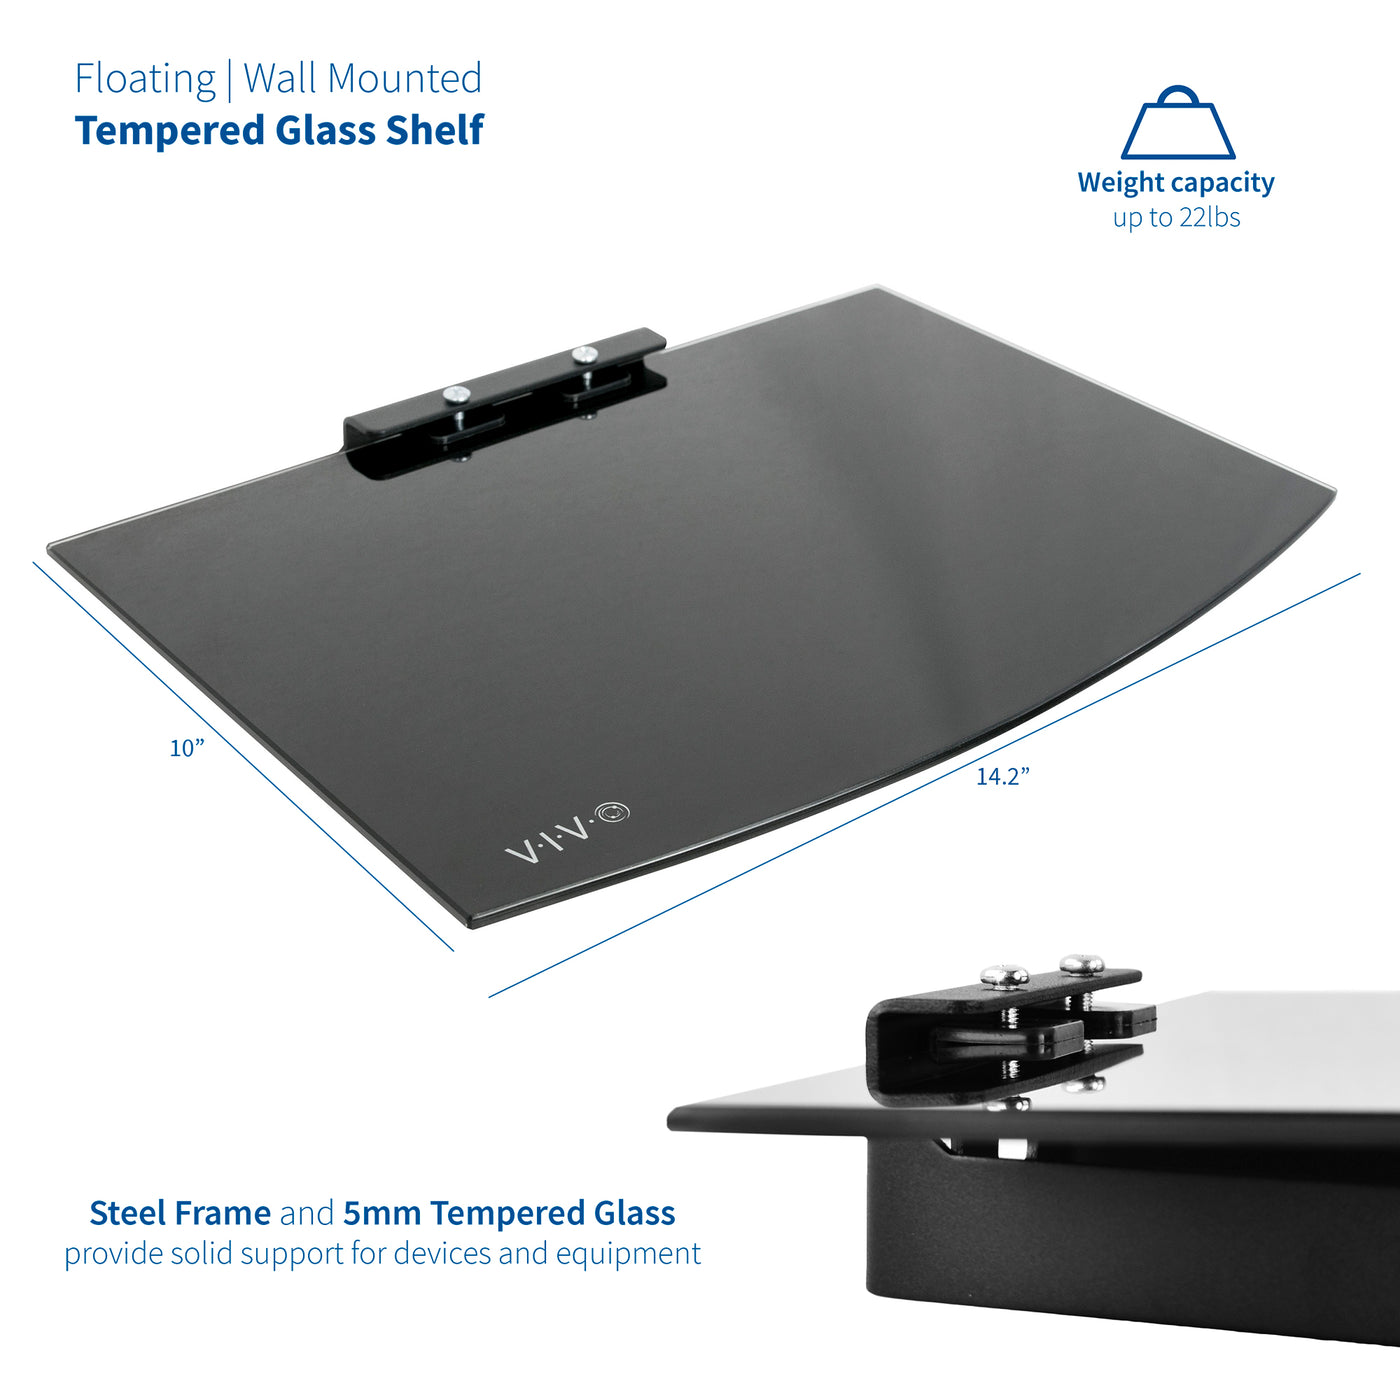 Tempered Glass has a sturdy steel frame that supports up to 22 lbs of divides and equipment.